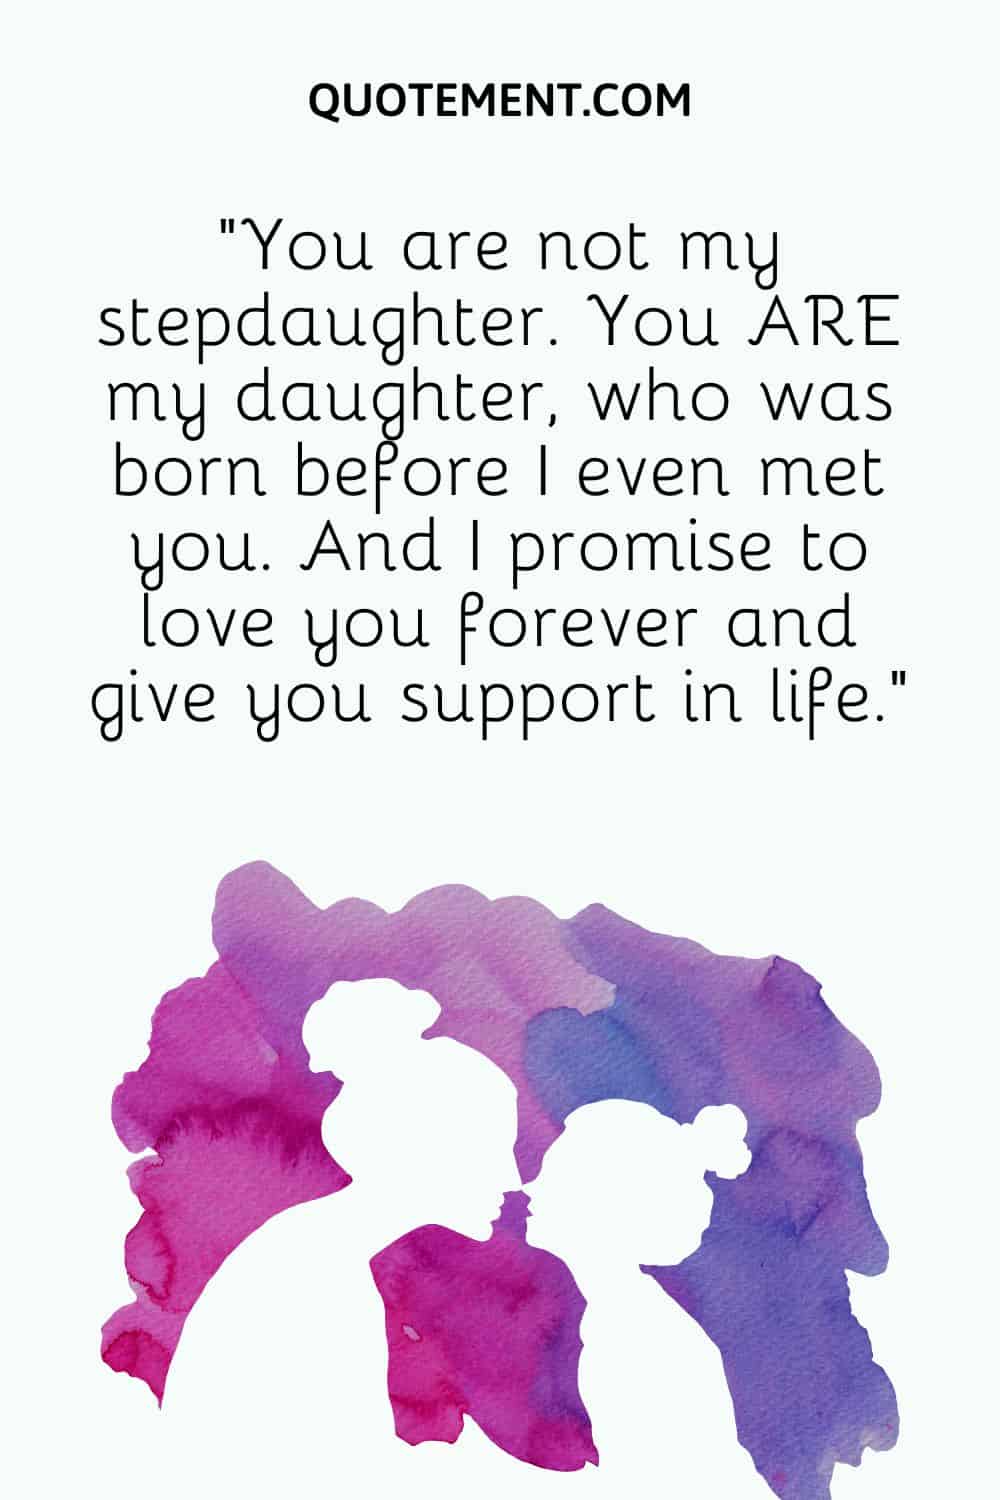 You are not my stepdaughter. You ARE my daughter